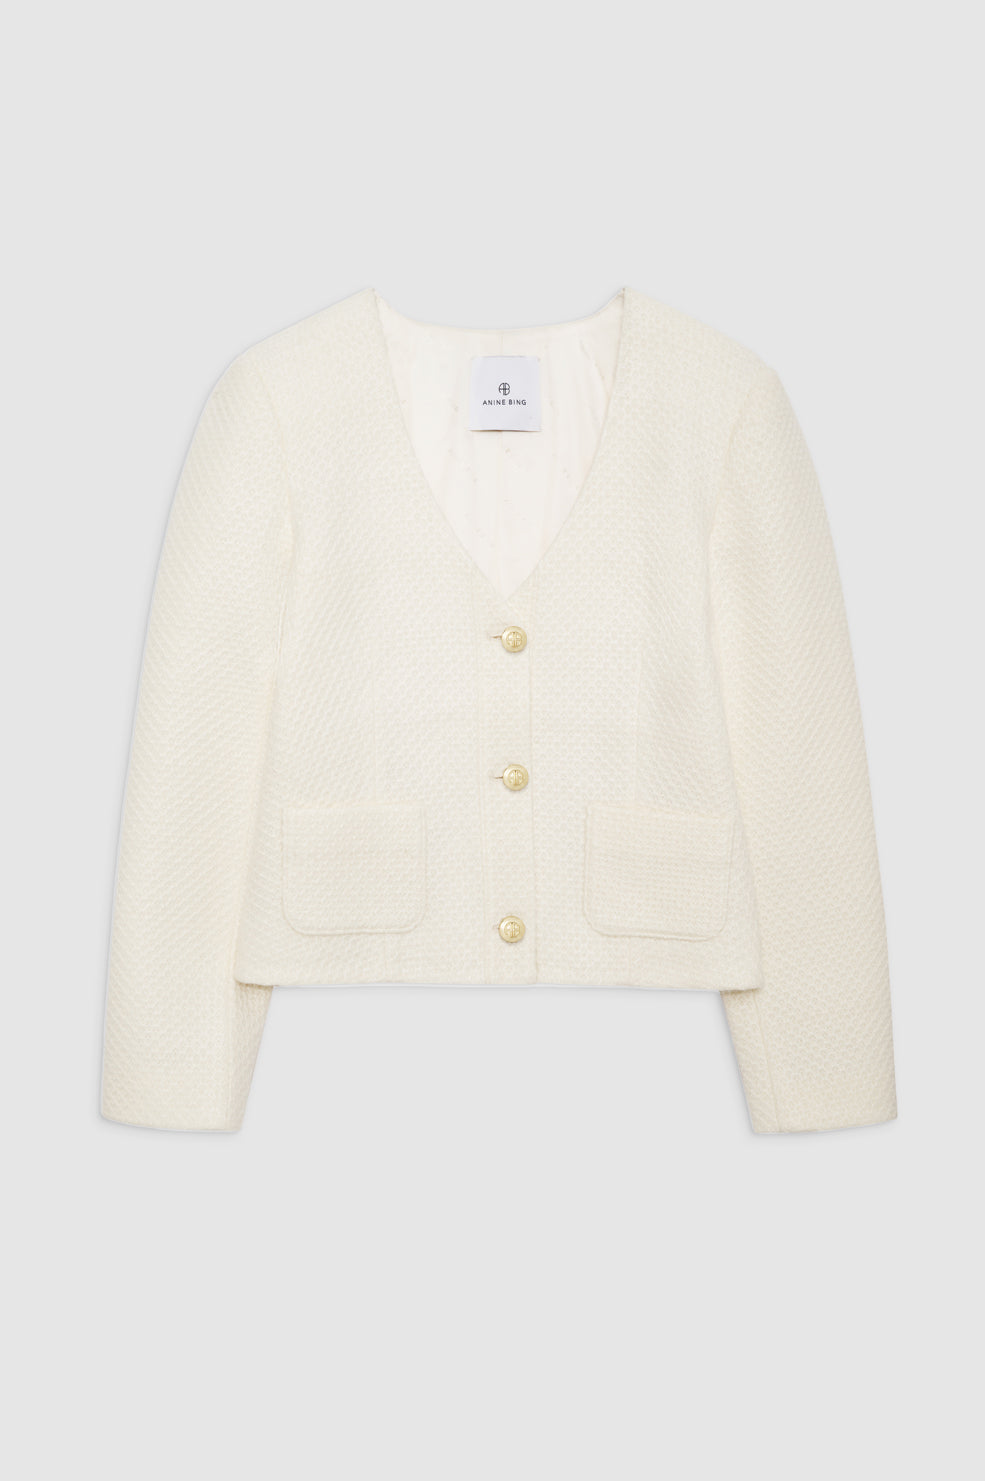 ANINE BING Anitta Jacket - Ivory Woven - Front View